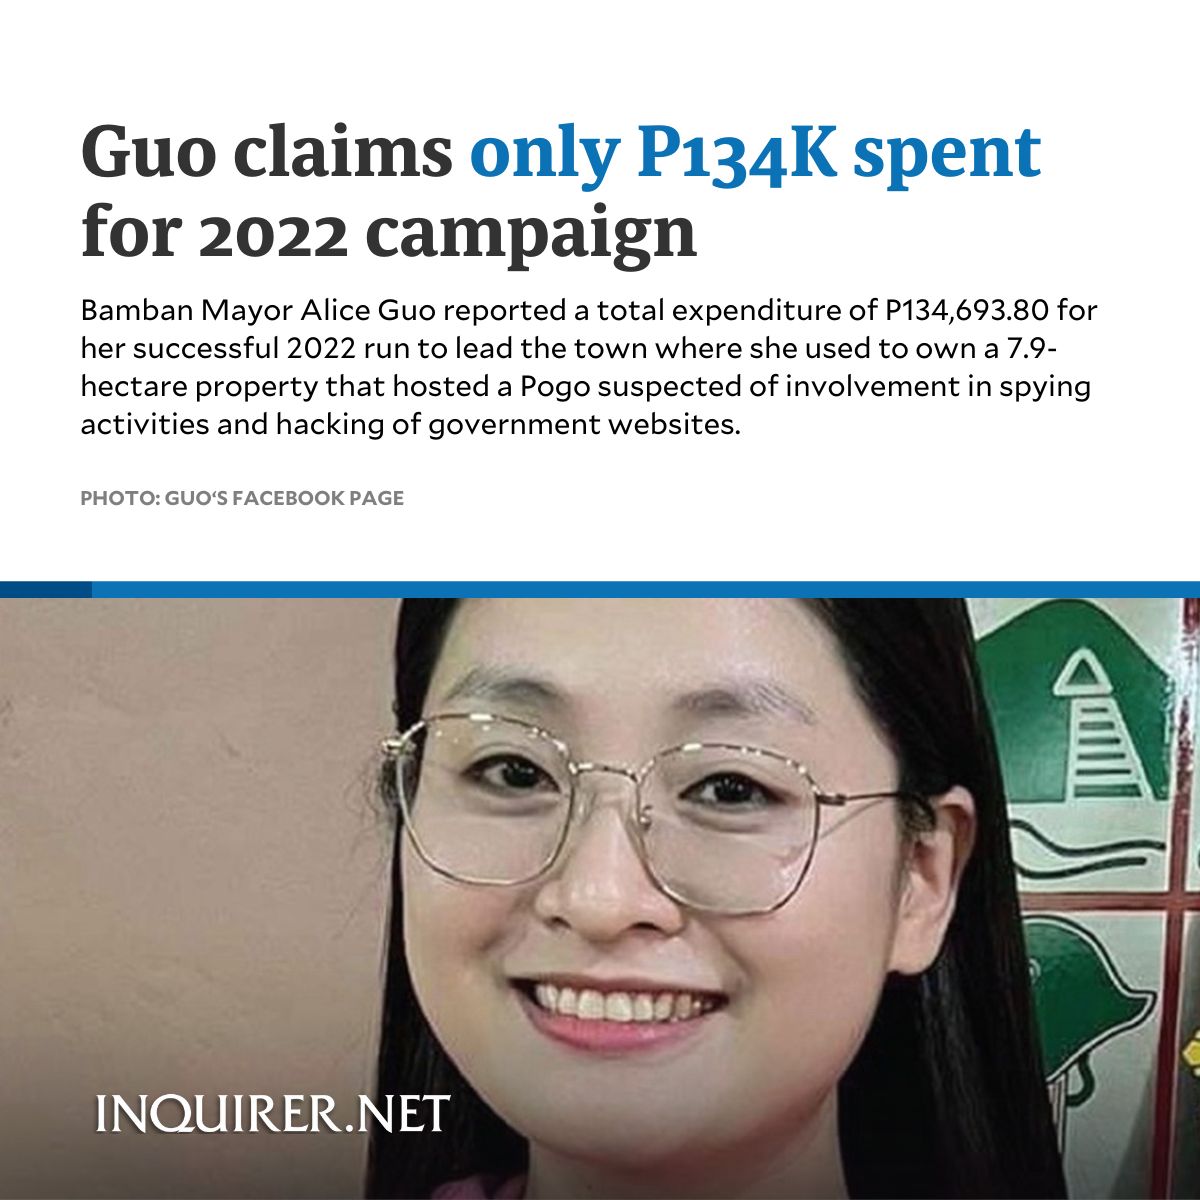 In her Soce, Bamban Mayor Alice Guo had no election contributions to declare, indicating her campaign had been bankrolled by “personal funds/resources.” But during the May 7 hearing presided over by Sen. Risa Hontiveros, Guo told a different story, saying her “friends” and the